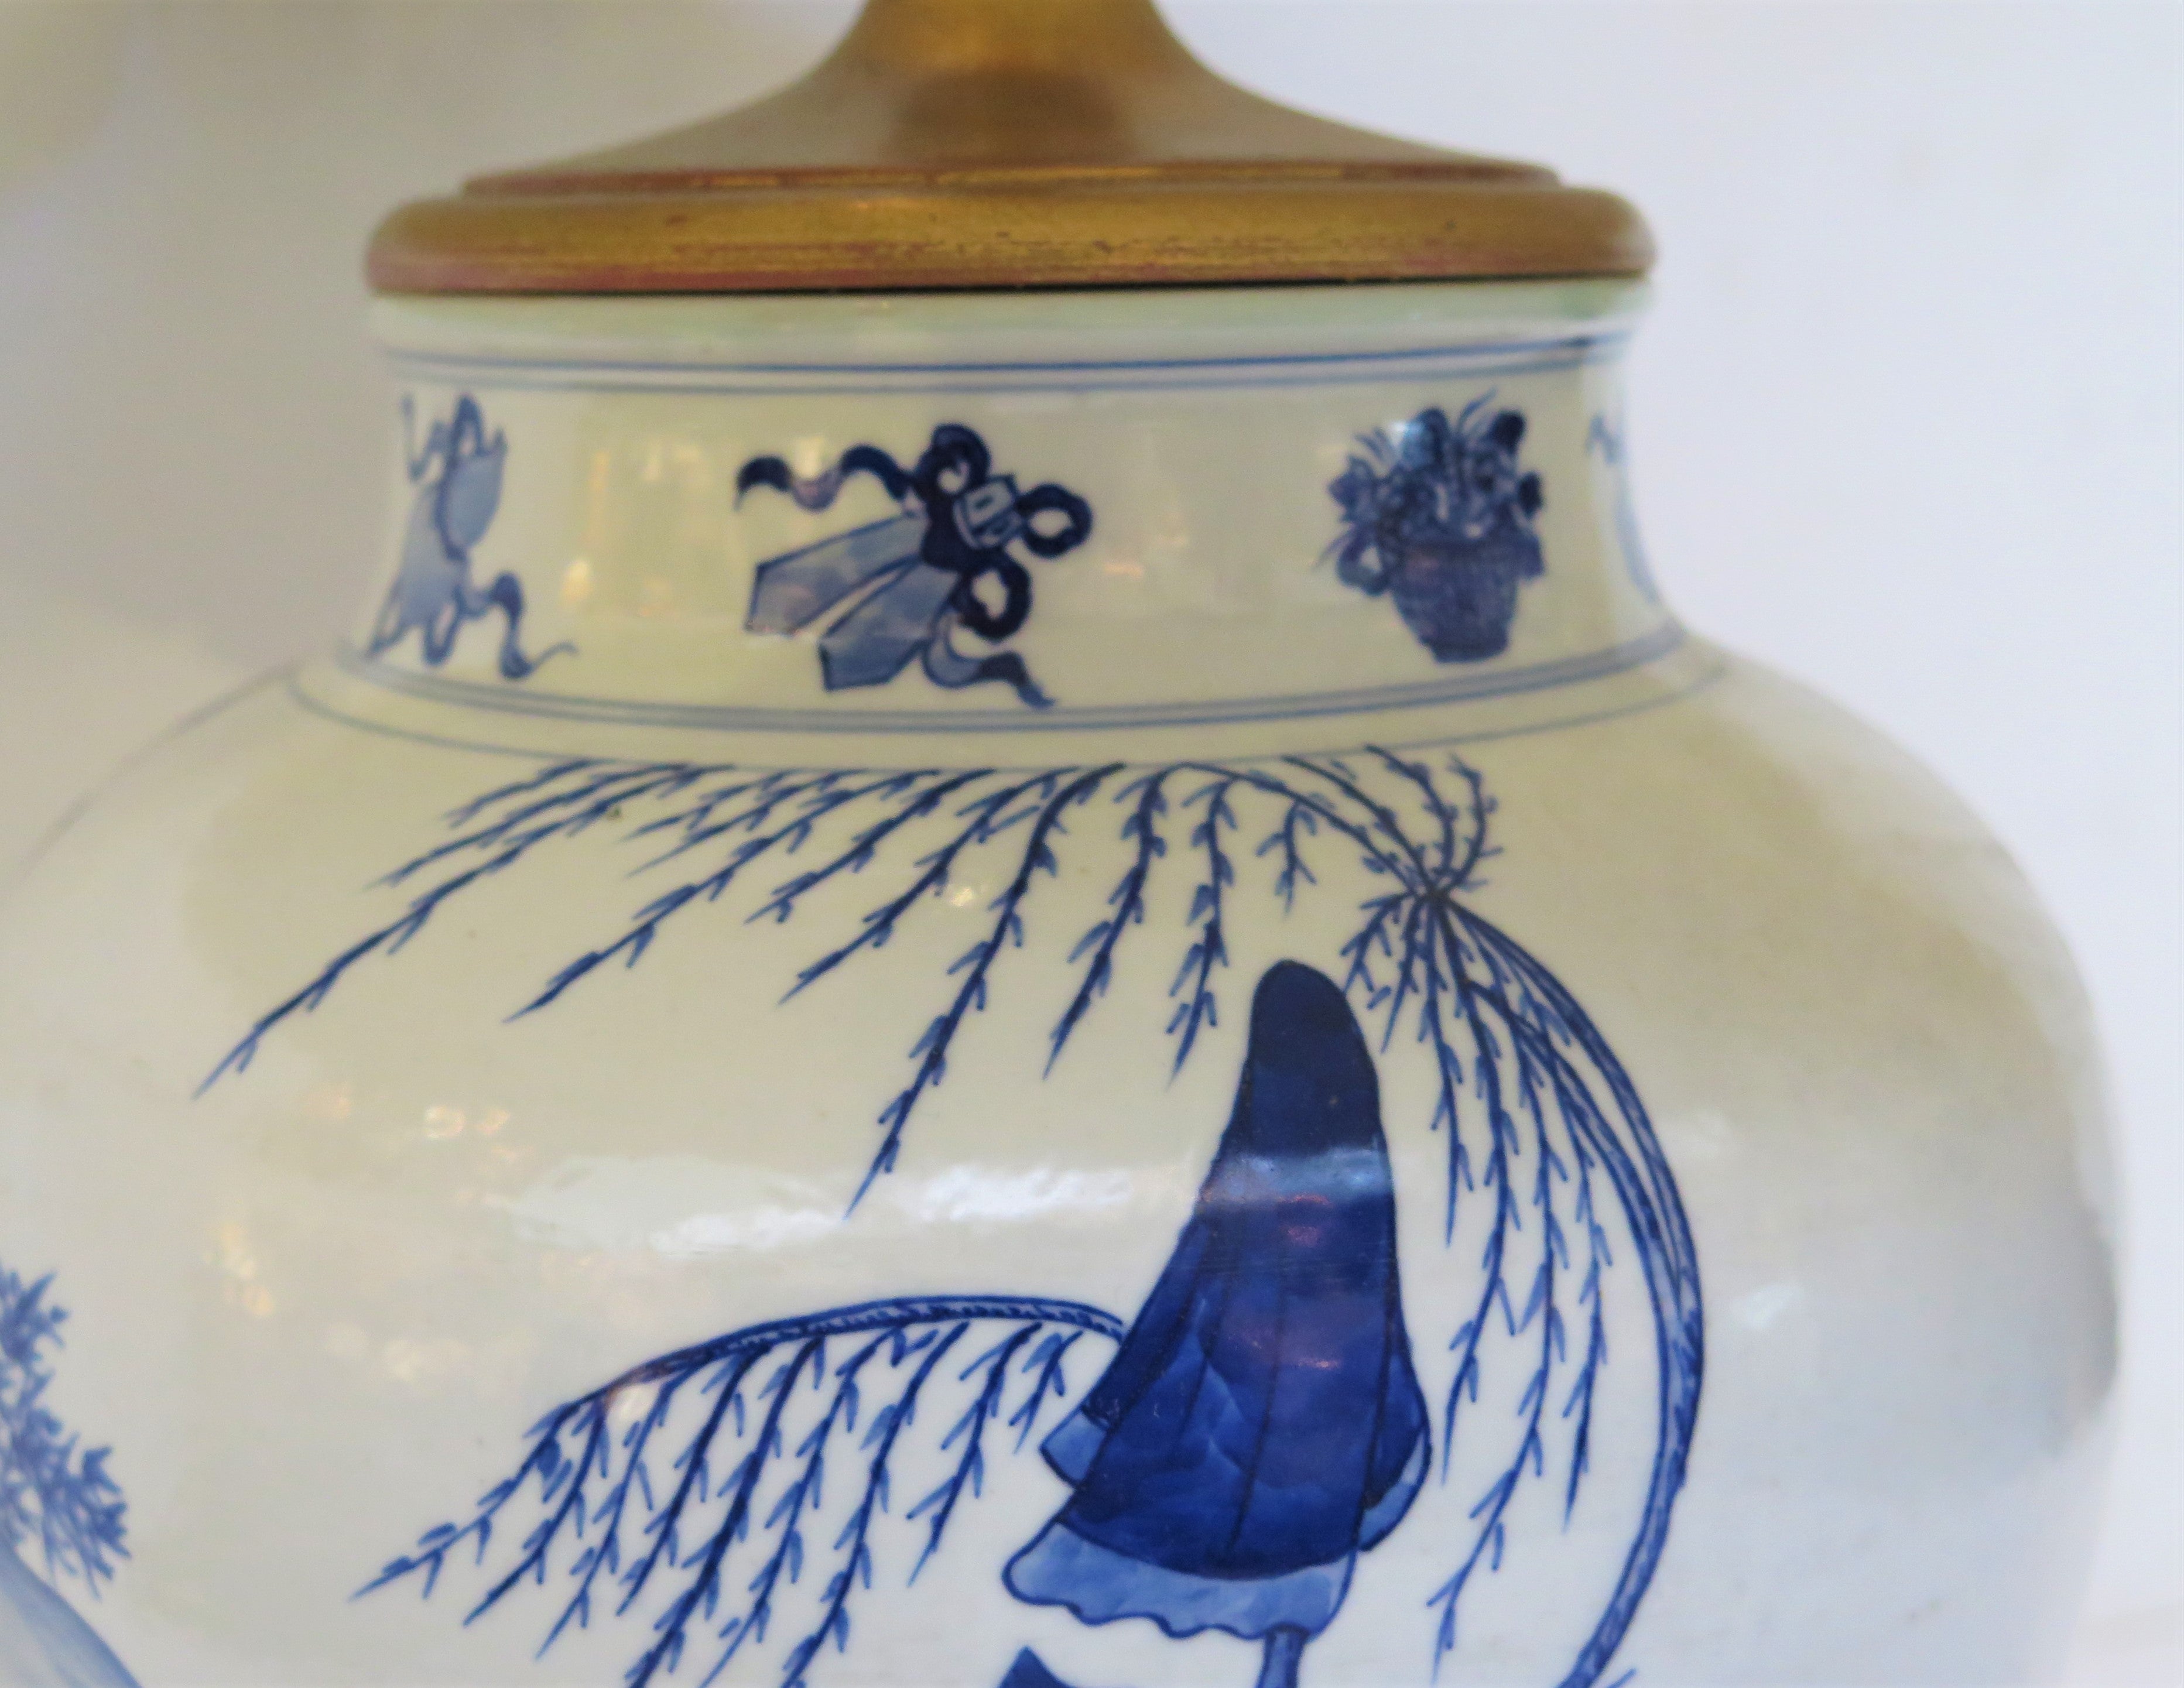 Chinese Blue and White Porcelain Ginger Jar as Custom Table Lamp